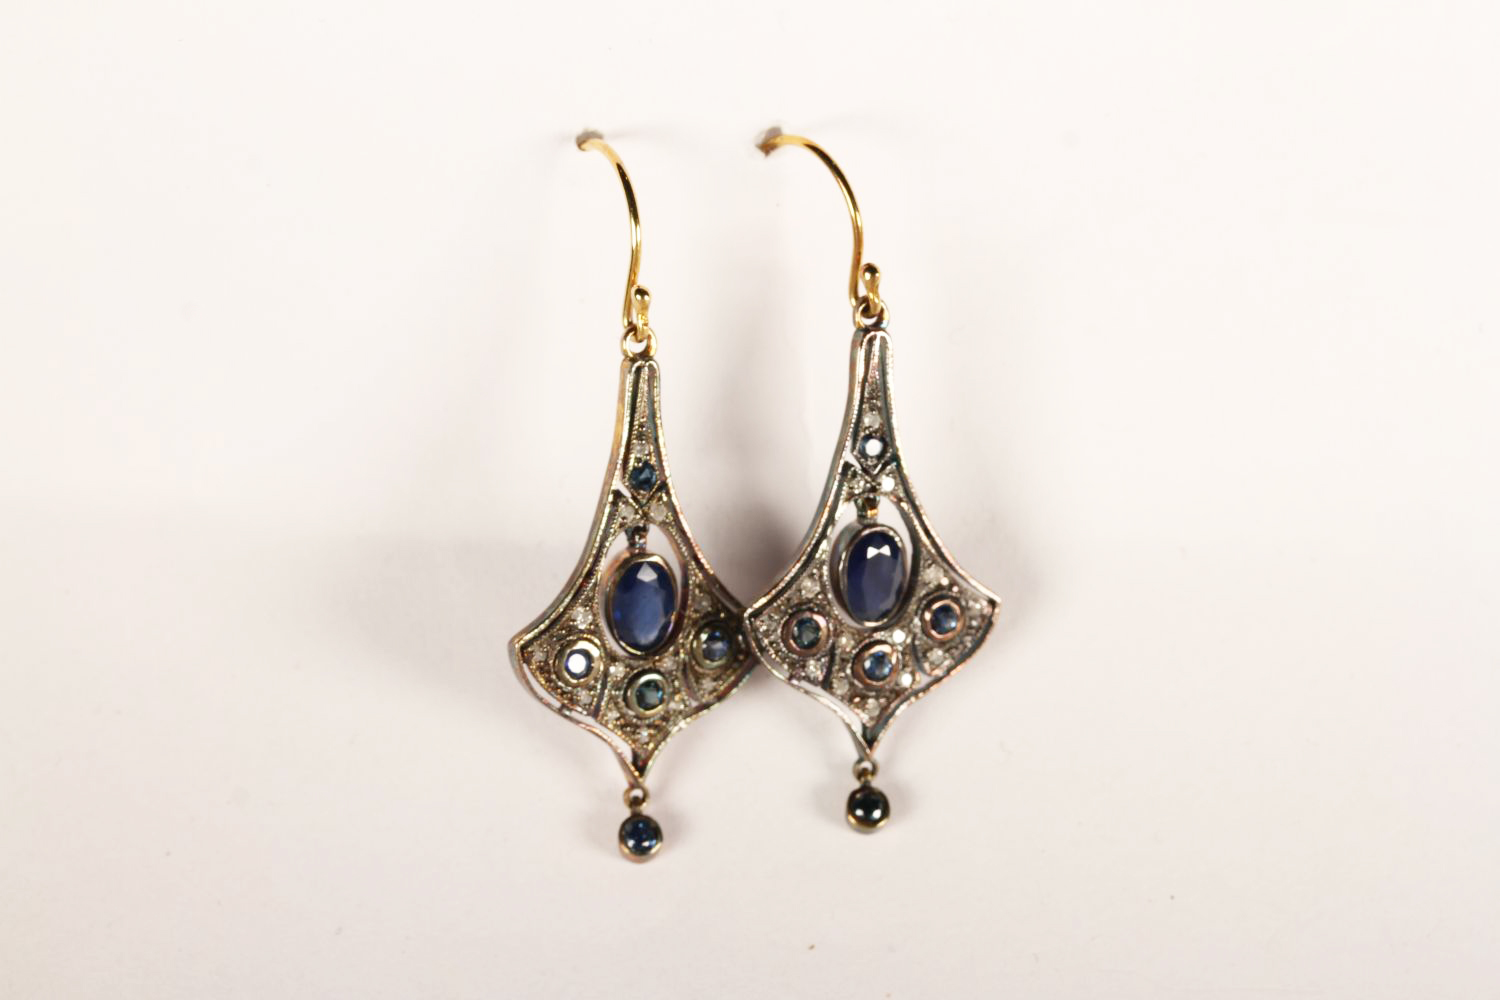 Pair of Sapphire and Diamond Flared-Design Drop Earrings, set with sapphires and diamonds, fish hook